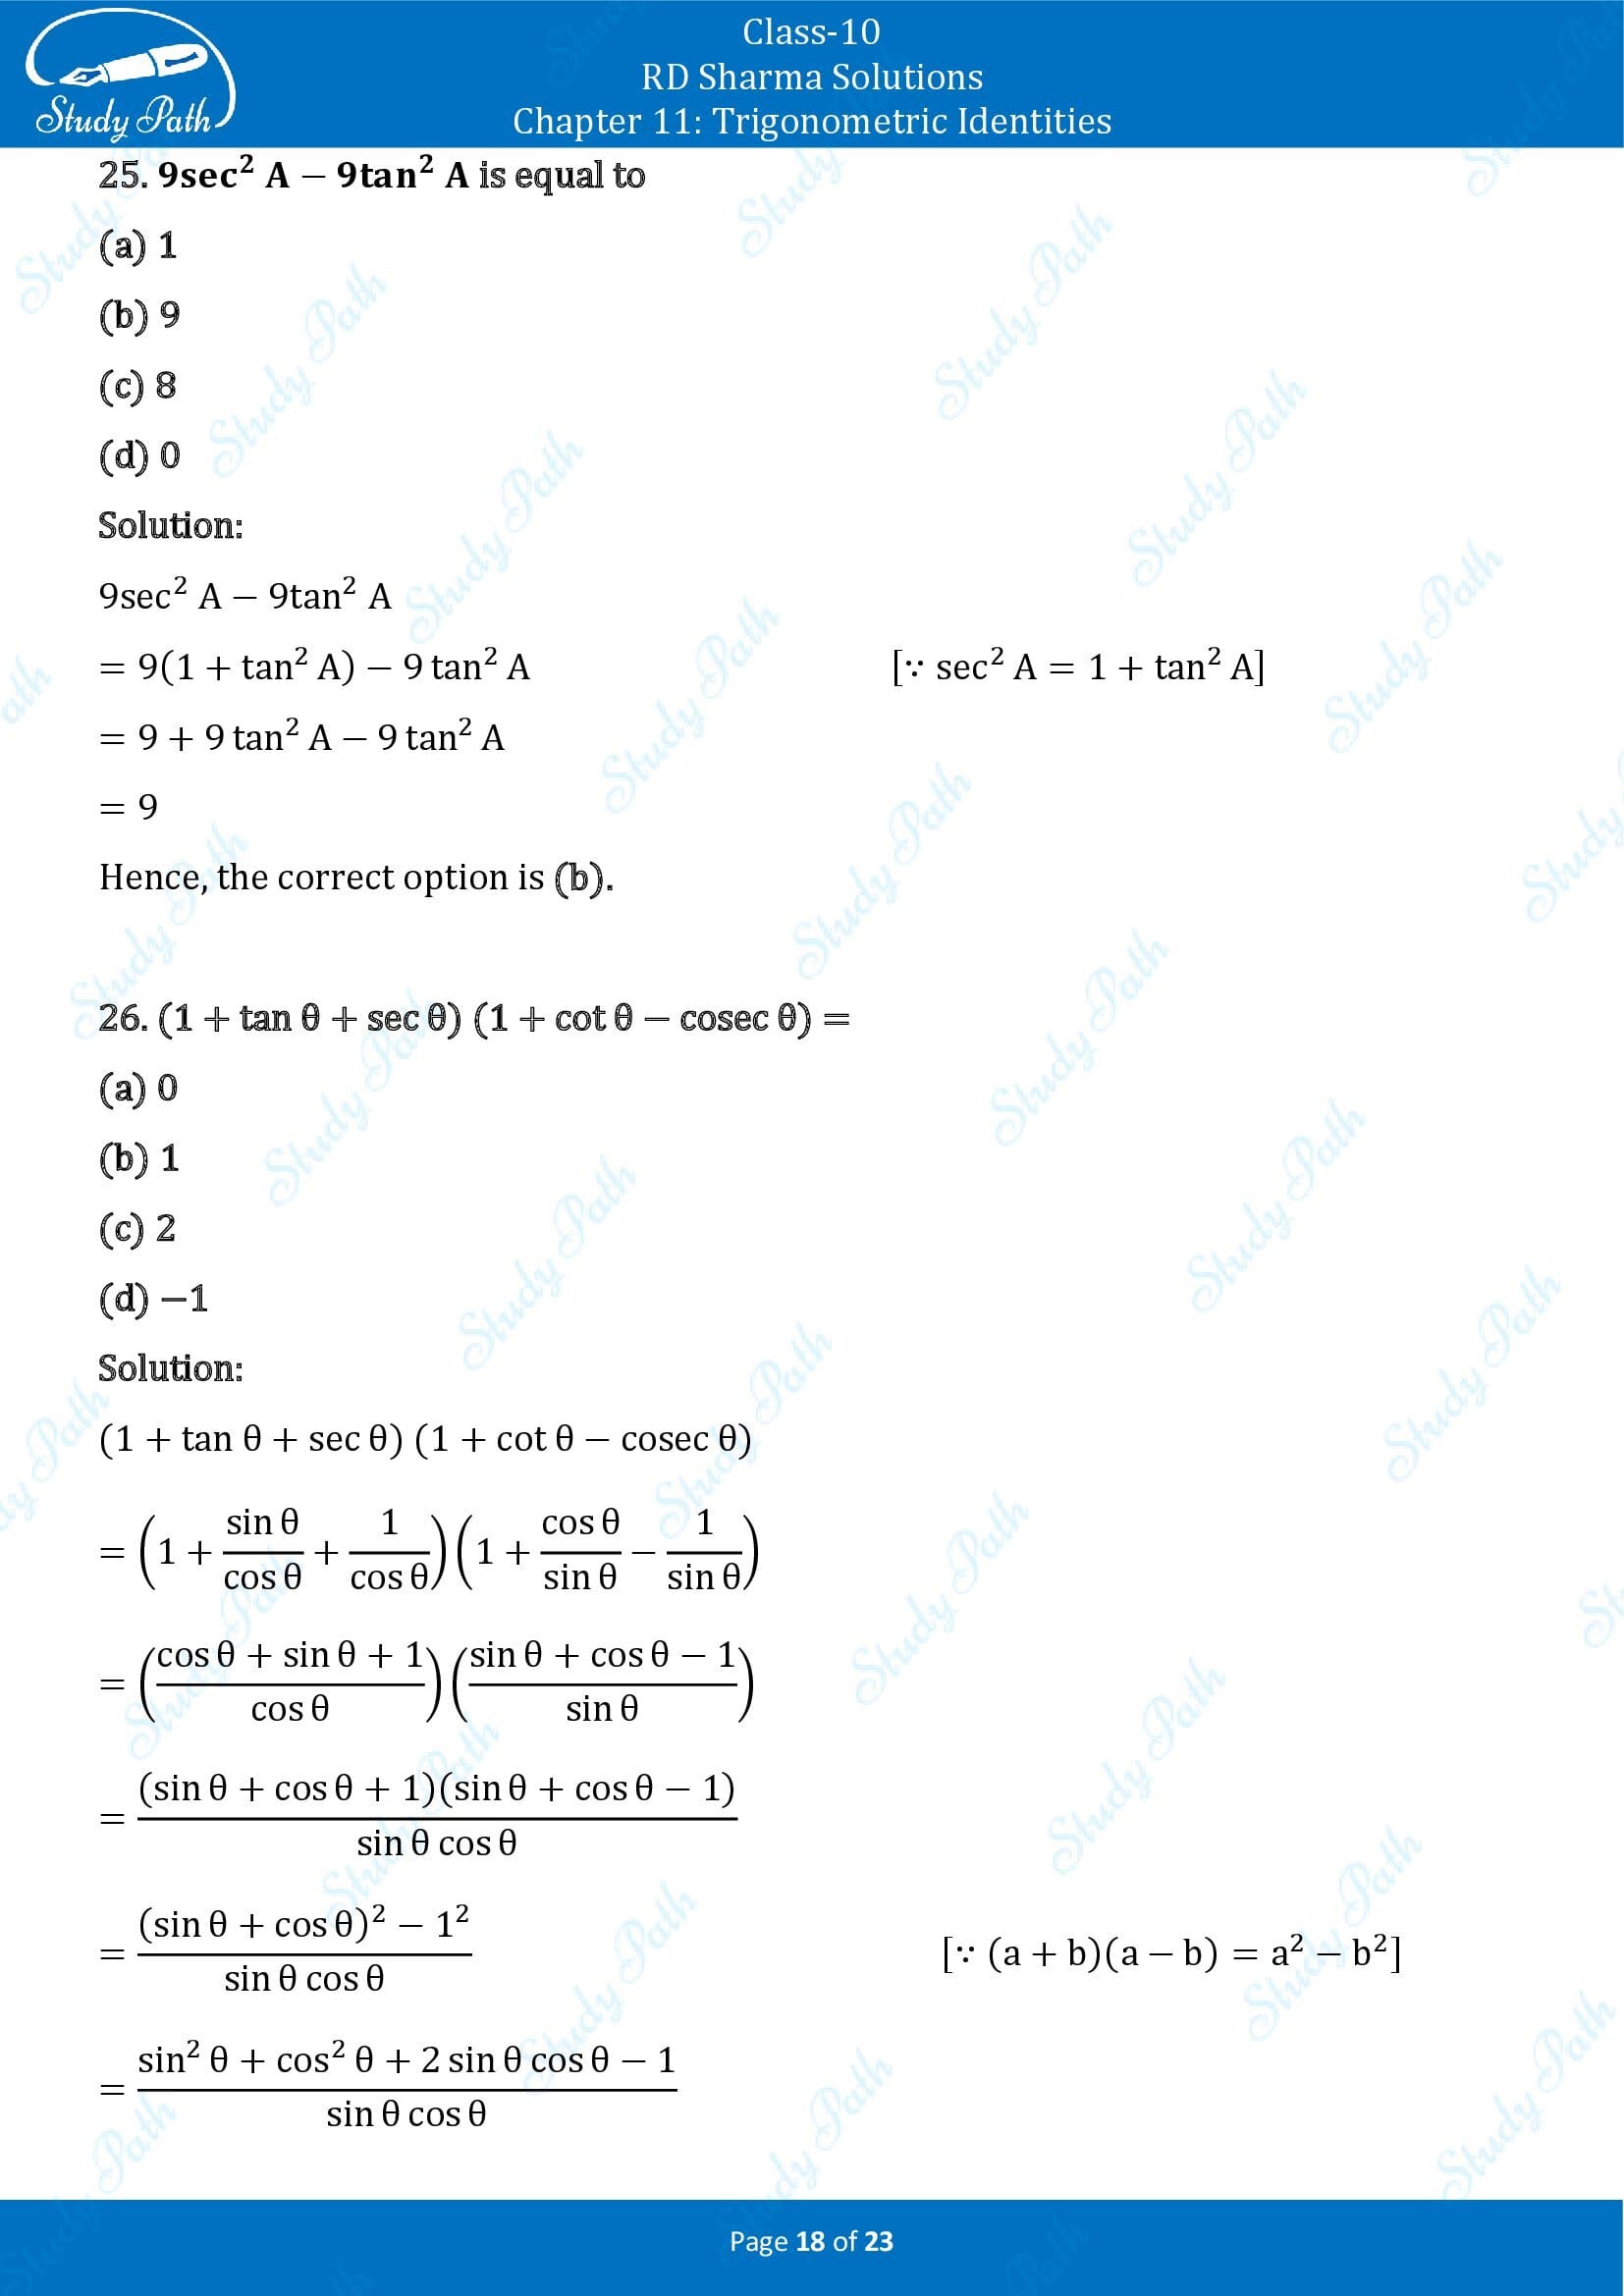 RD Sharma Solutions Class 10 Chapter 11 Trigonometric Identities Multiple Choice Questions MCQs 00018